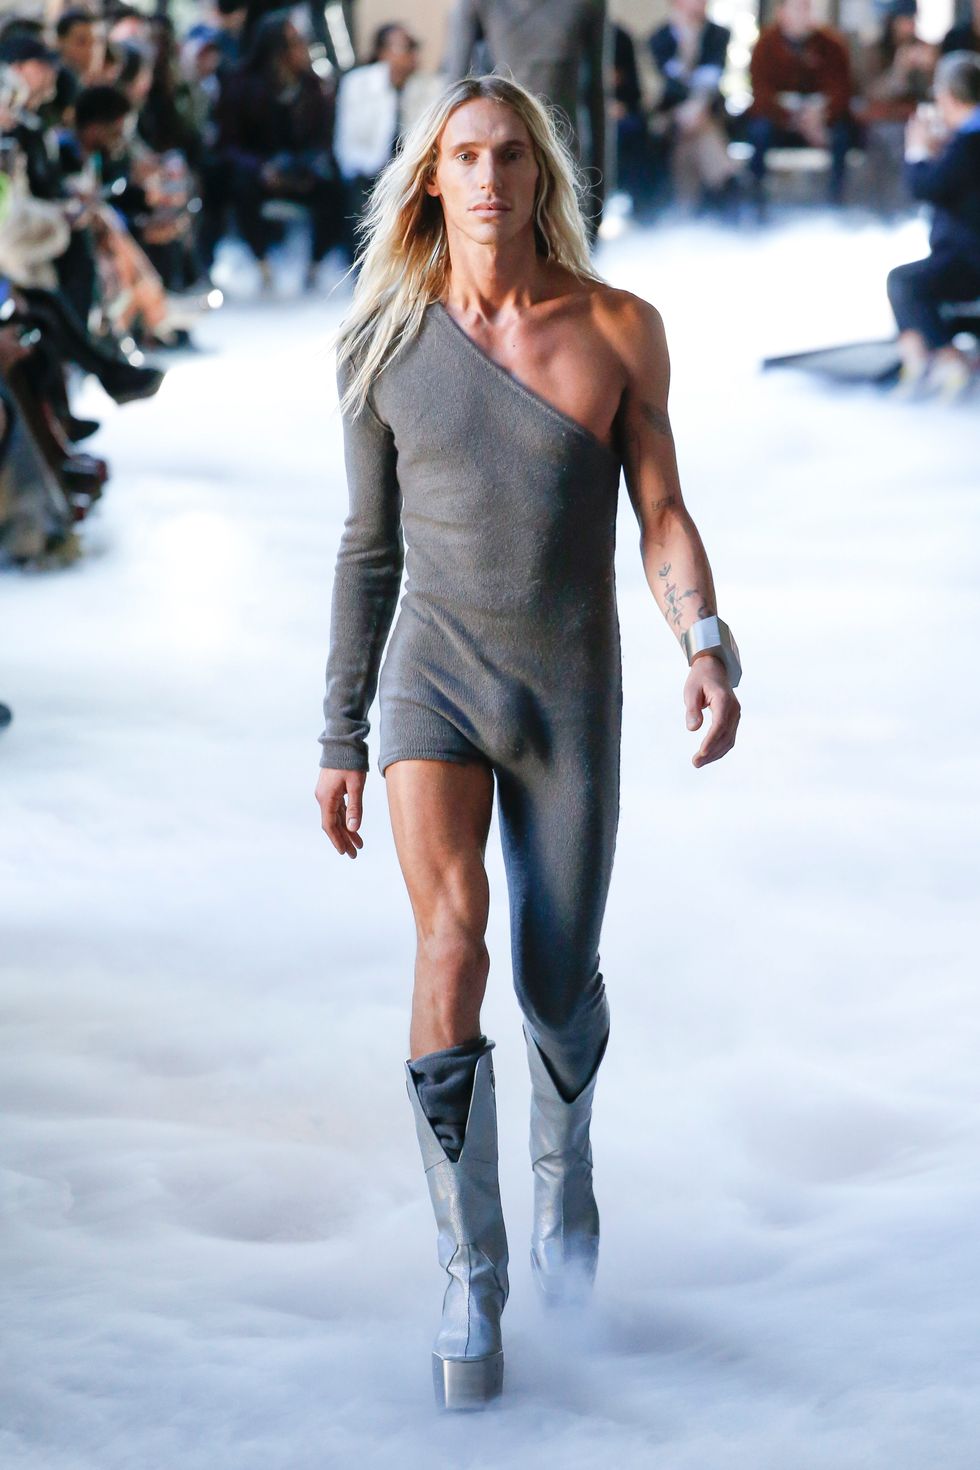 The Shoulders at Rick Owens' Fall 2020 Men's Were Monstrous